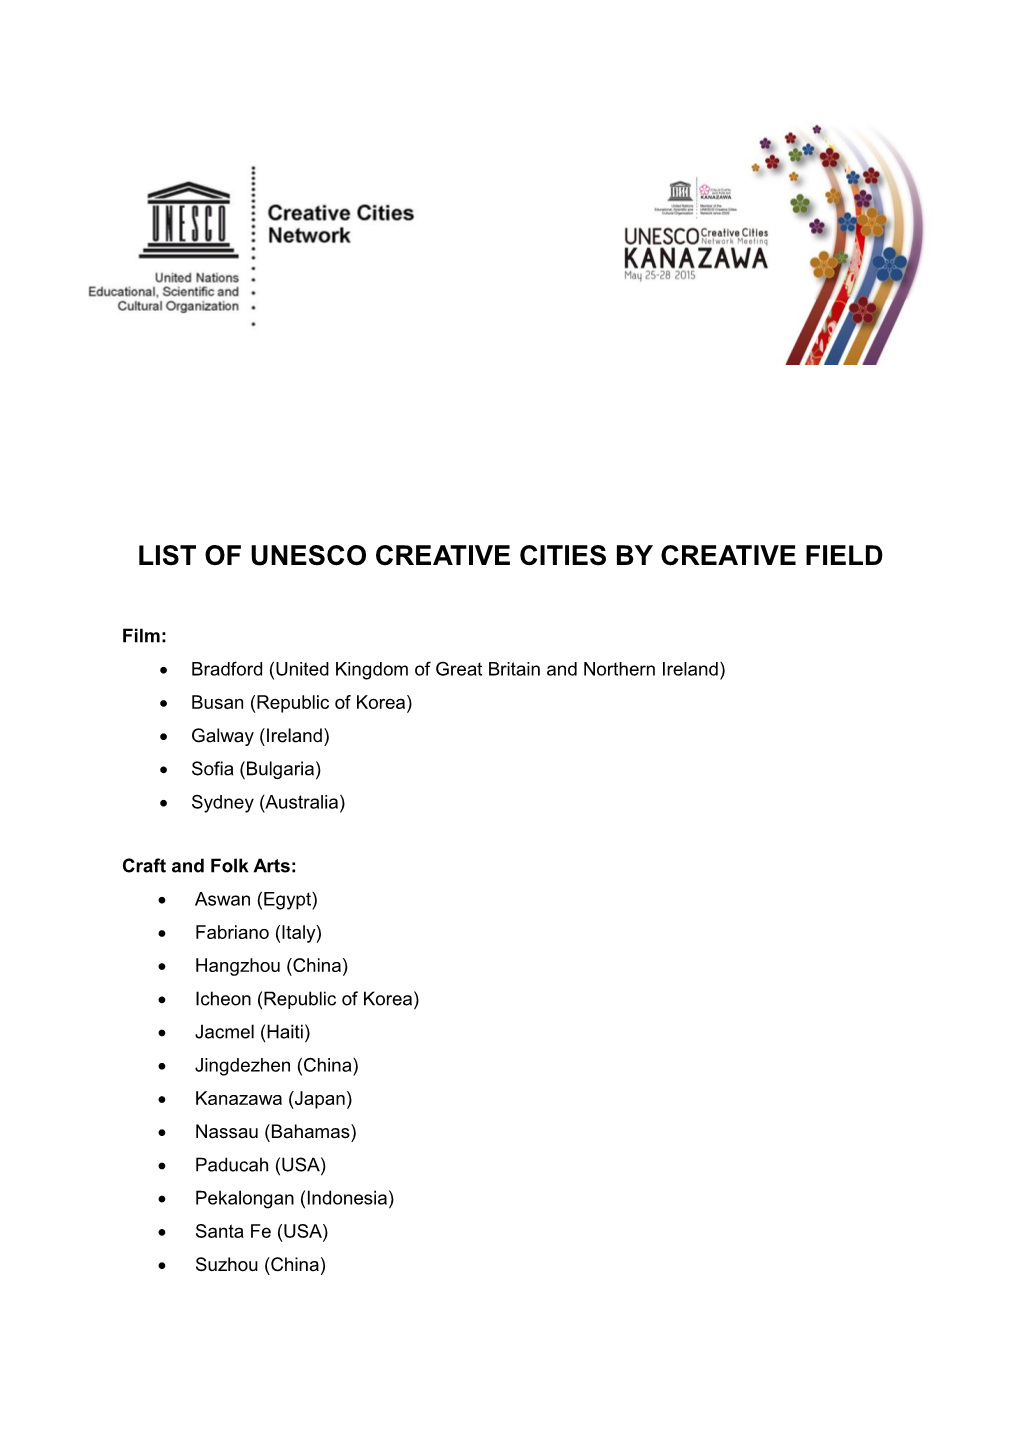 List of Unesco Creative Cities by Creative Field